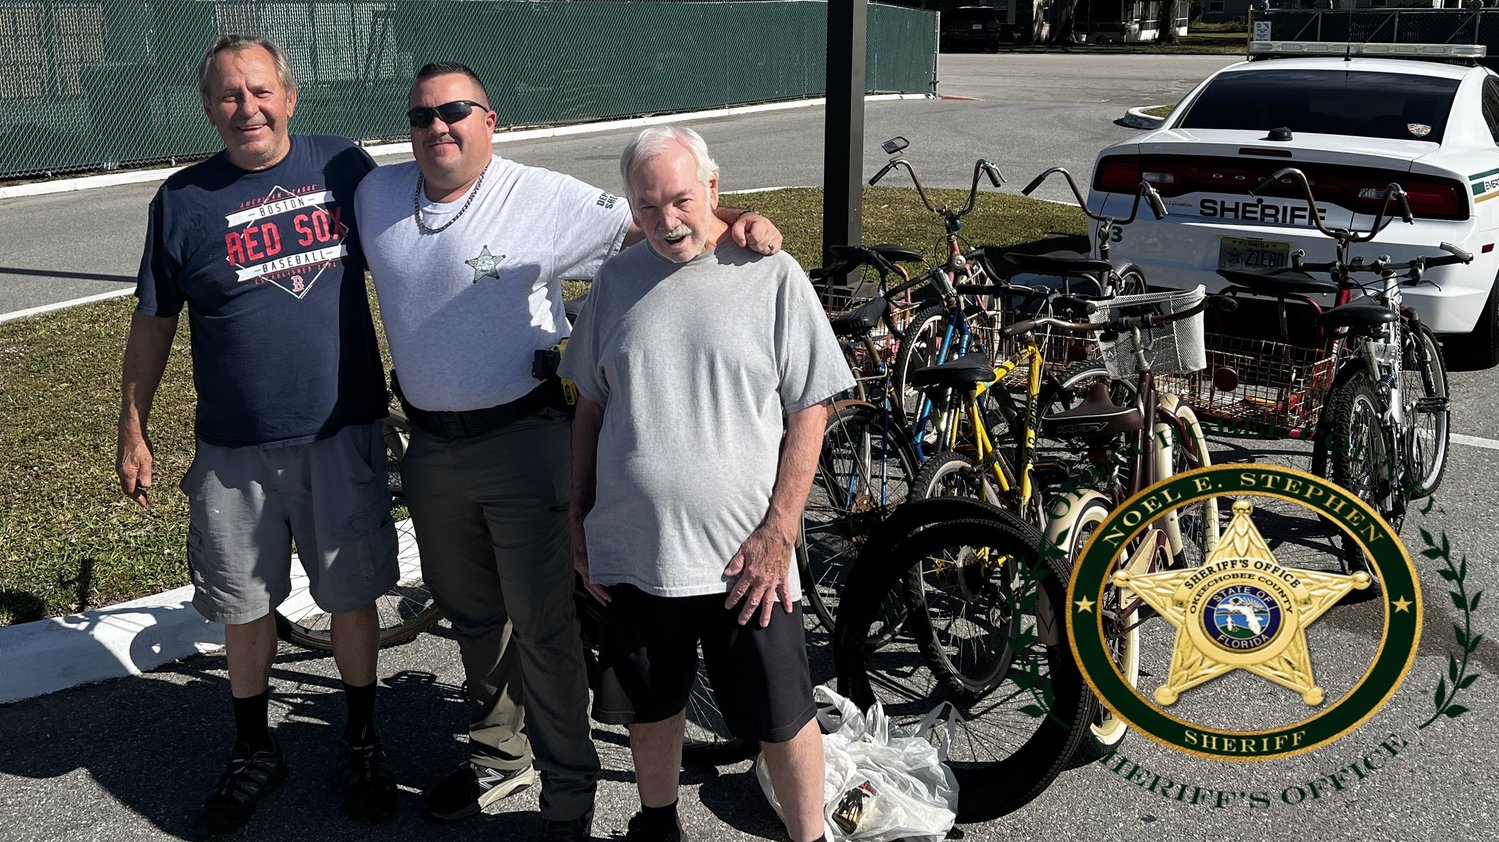 On Jan. 11, Okeechobee County Sheriff's Office received a surprise donation of lightly used bicycles from Oasis Village. [Courtesy photo]